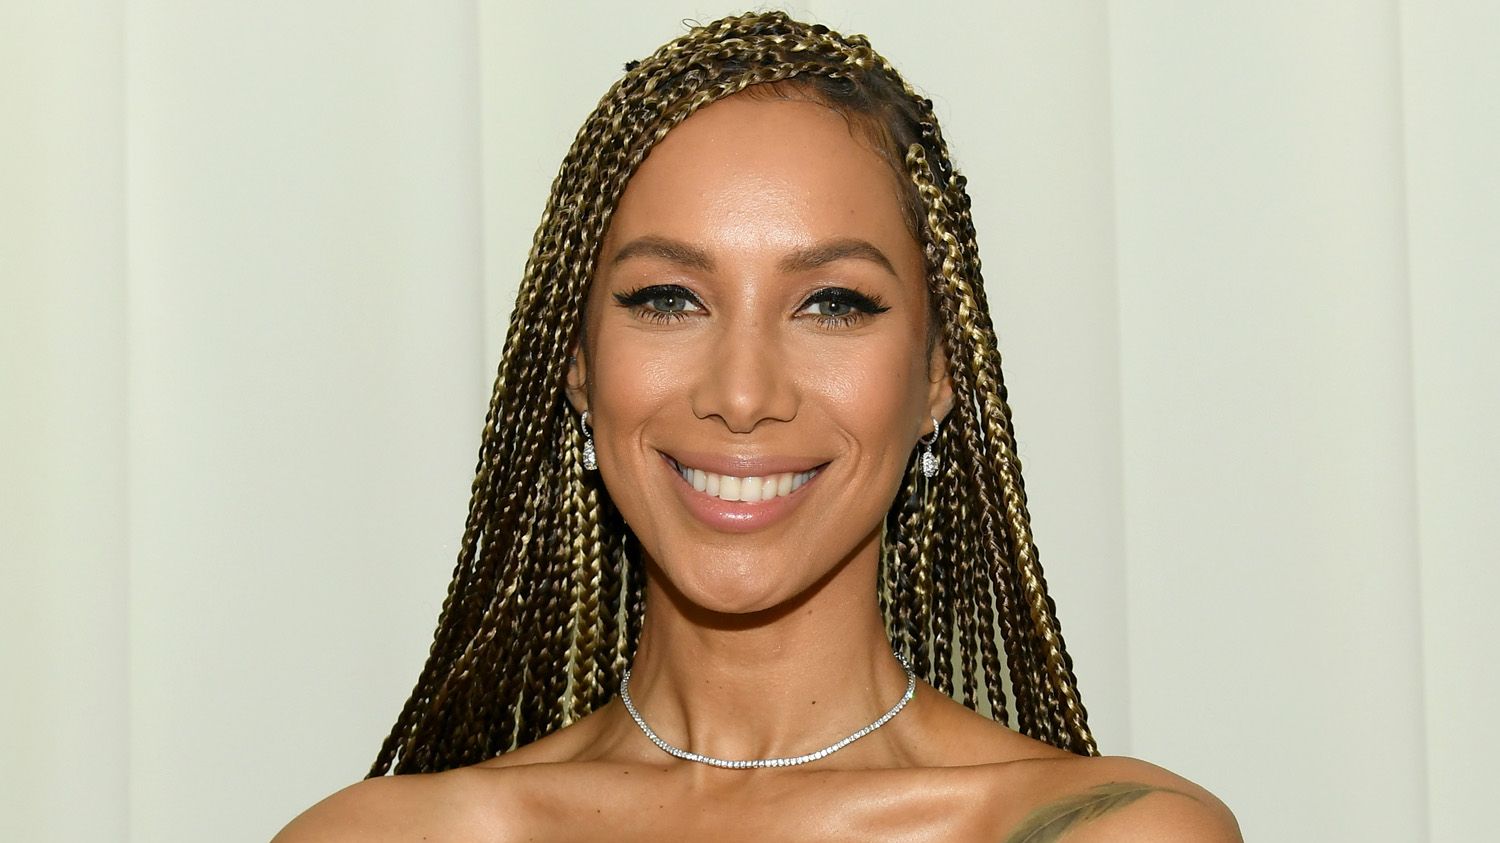 Leona Lewis is pregnant with her first child